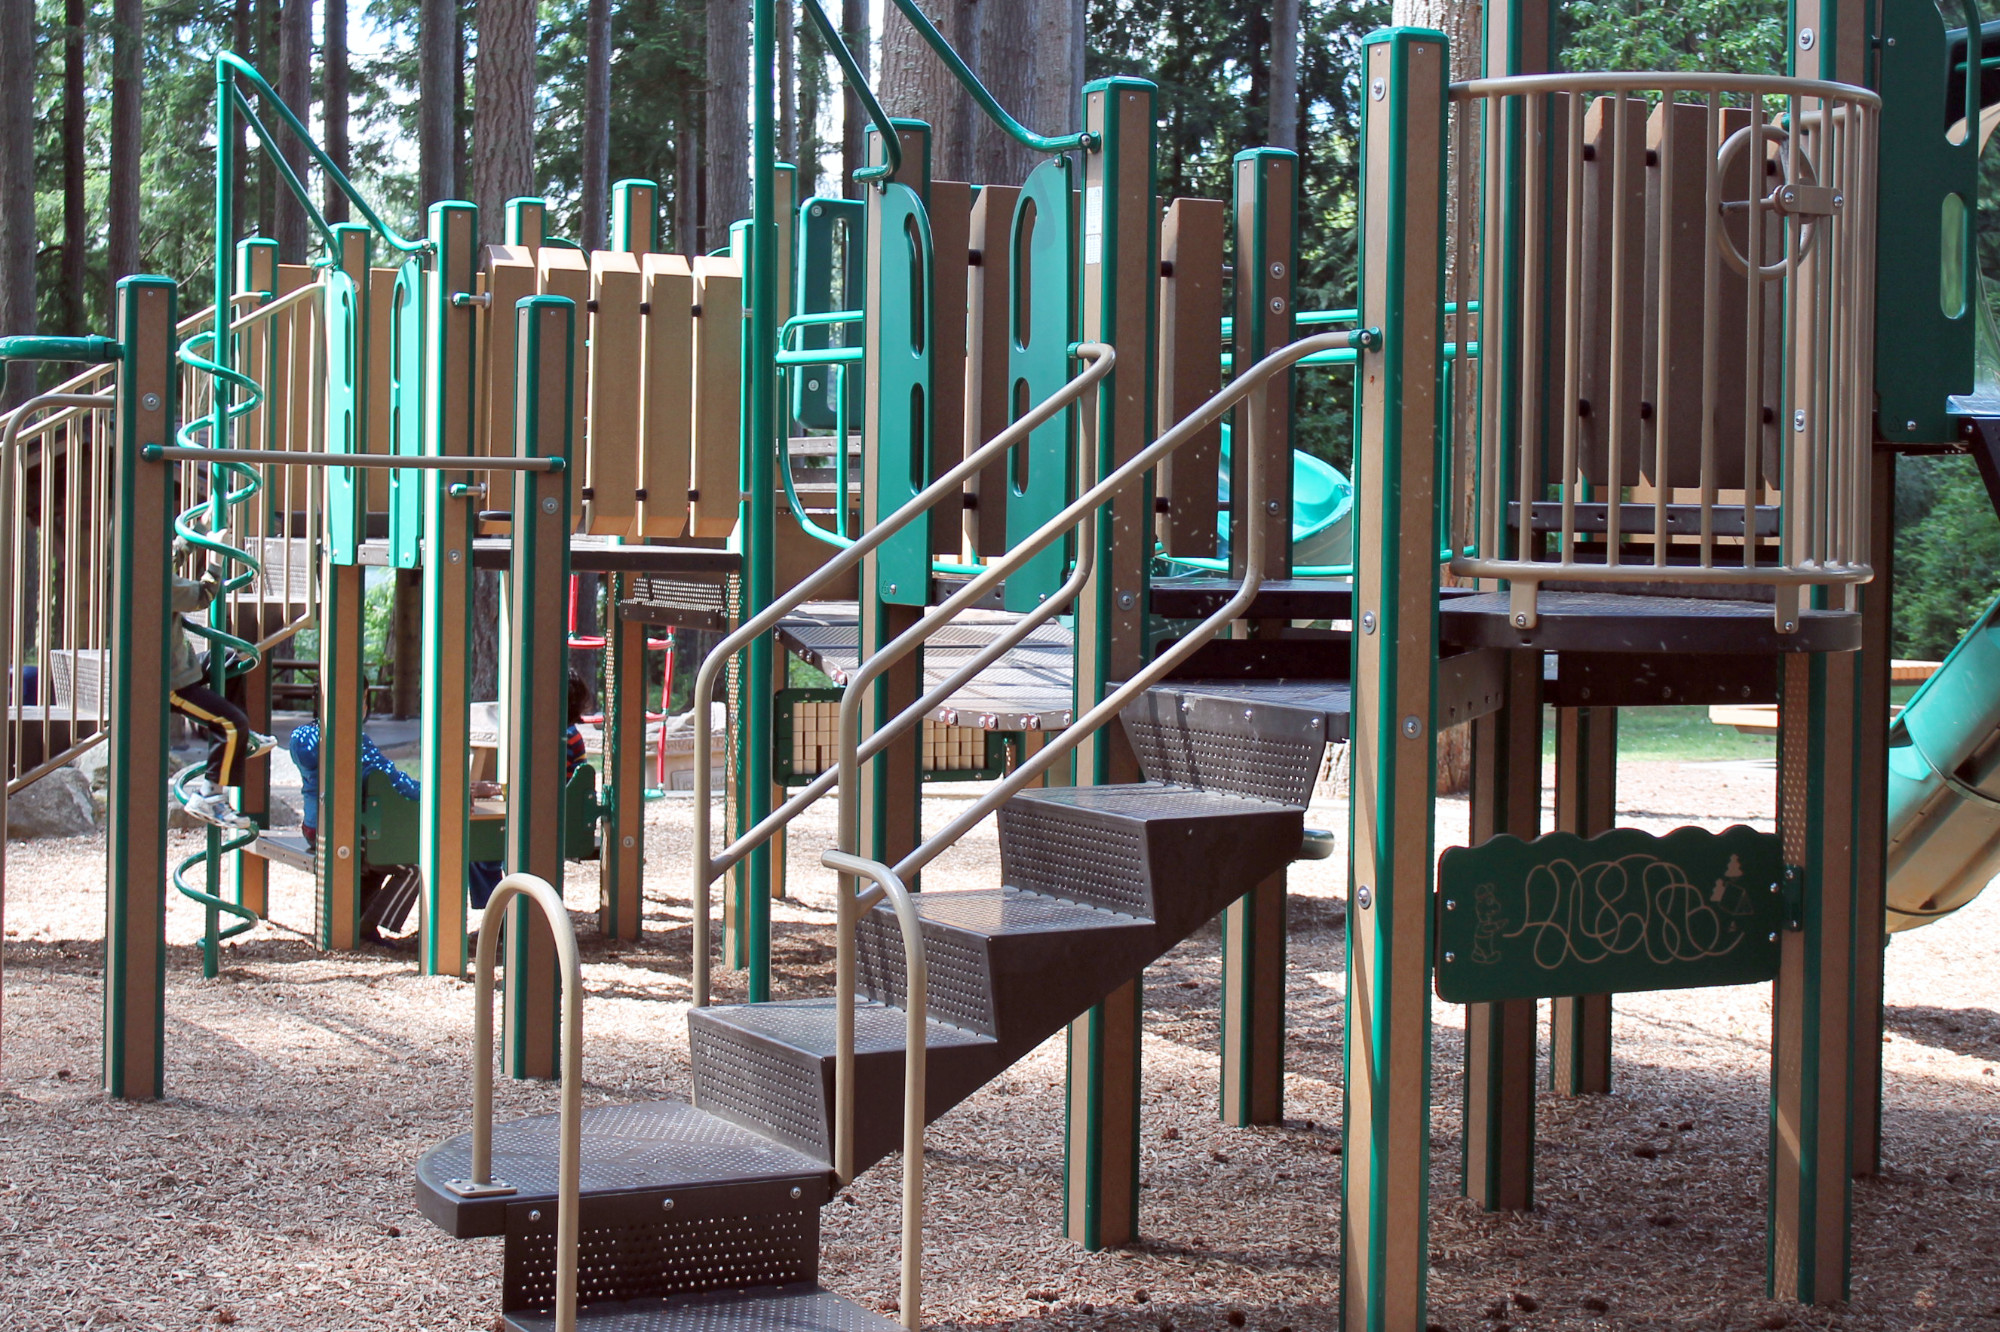 Pine Lake Park playground structure with slides, steps, bars, poles, and other apparatuses. 